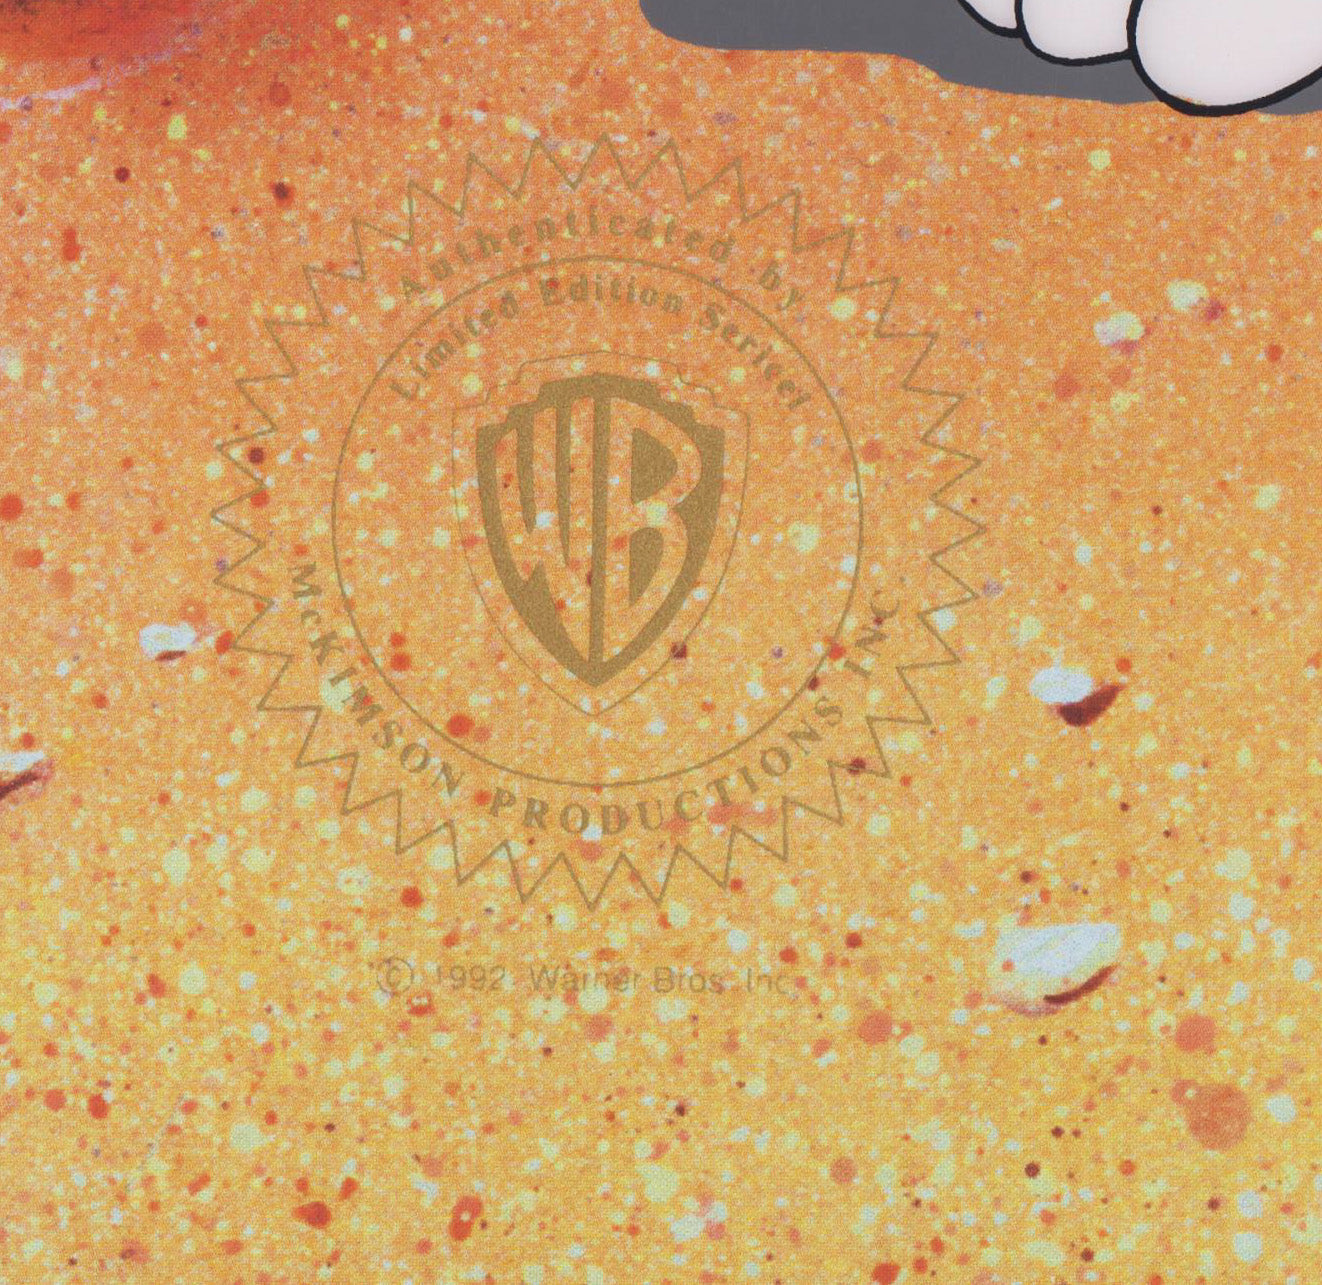 Loaded Hands Warner Bros Sericel with Official Warner Bros Seal of Authenticity